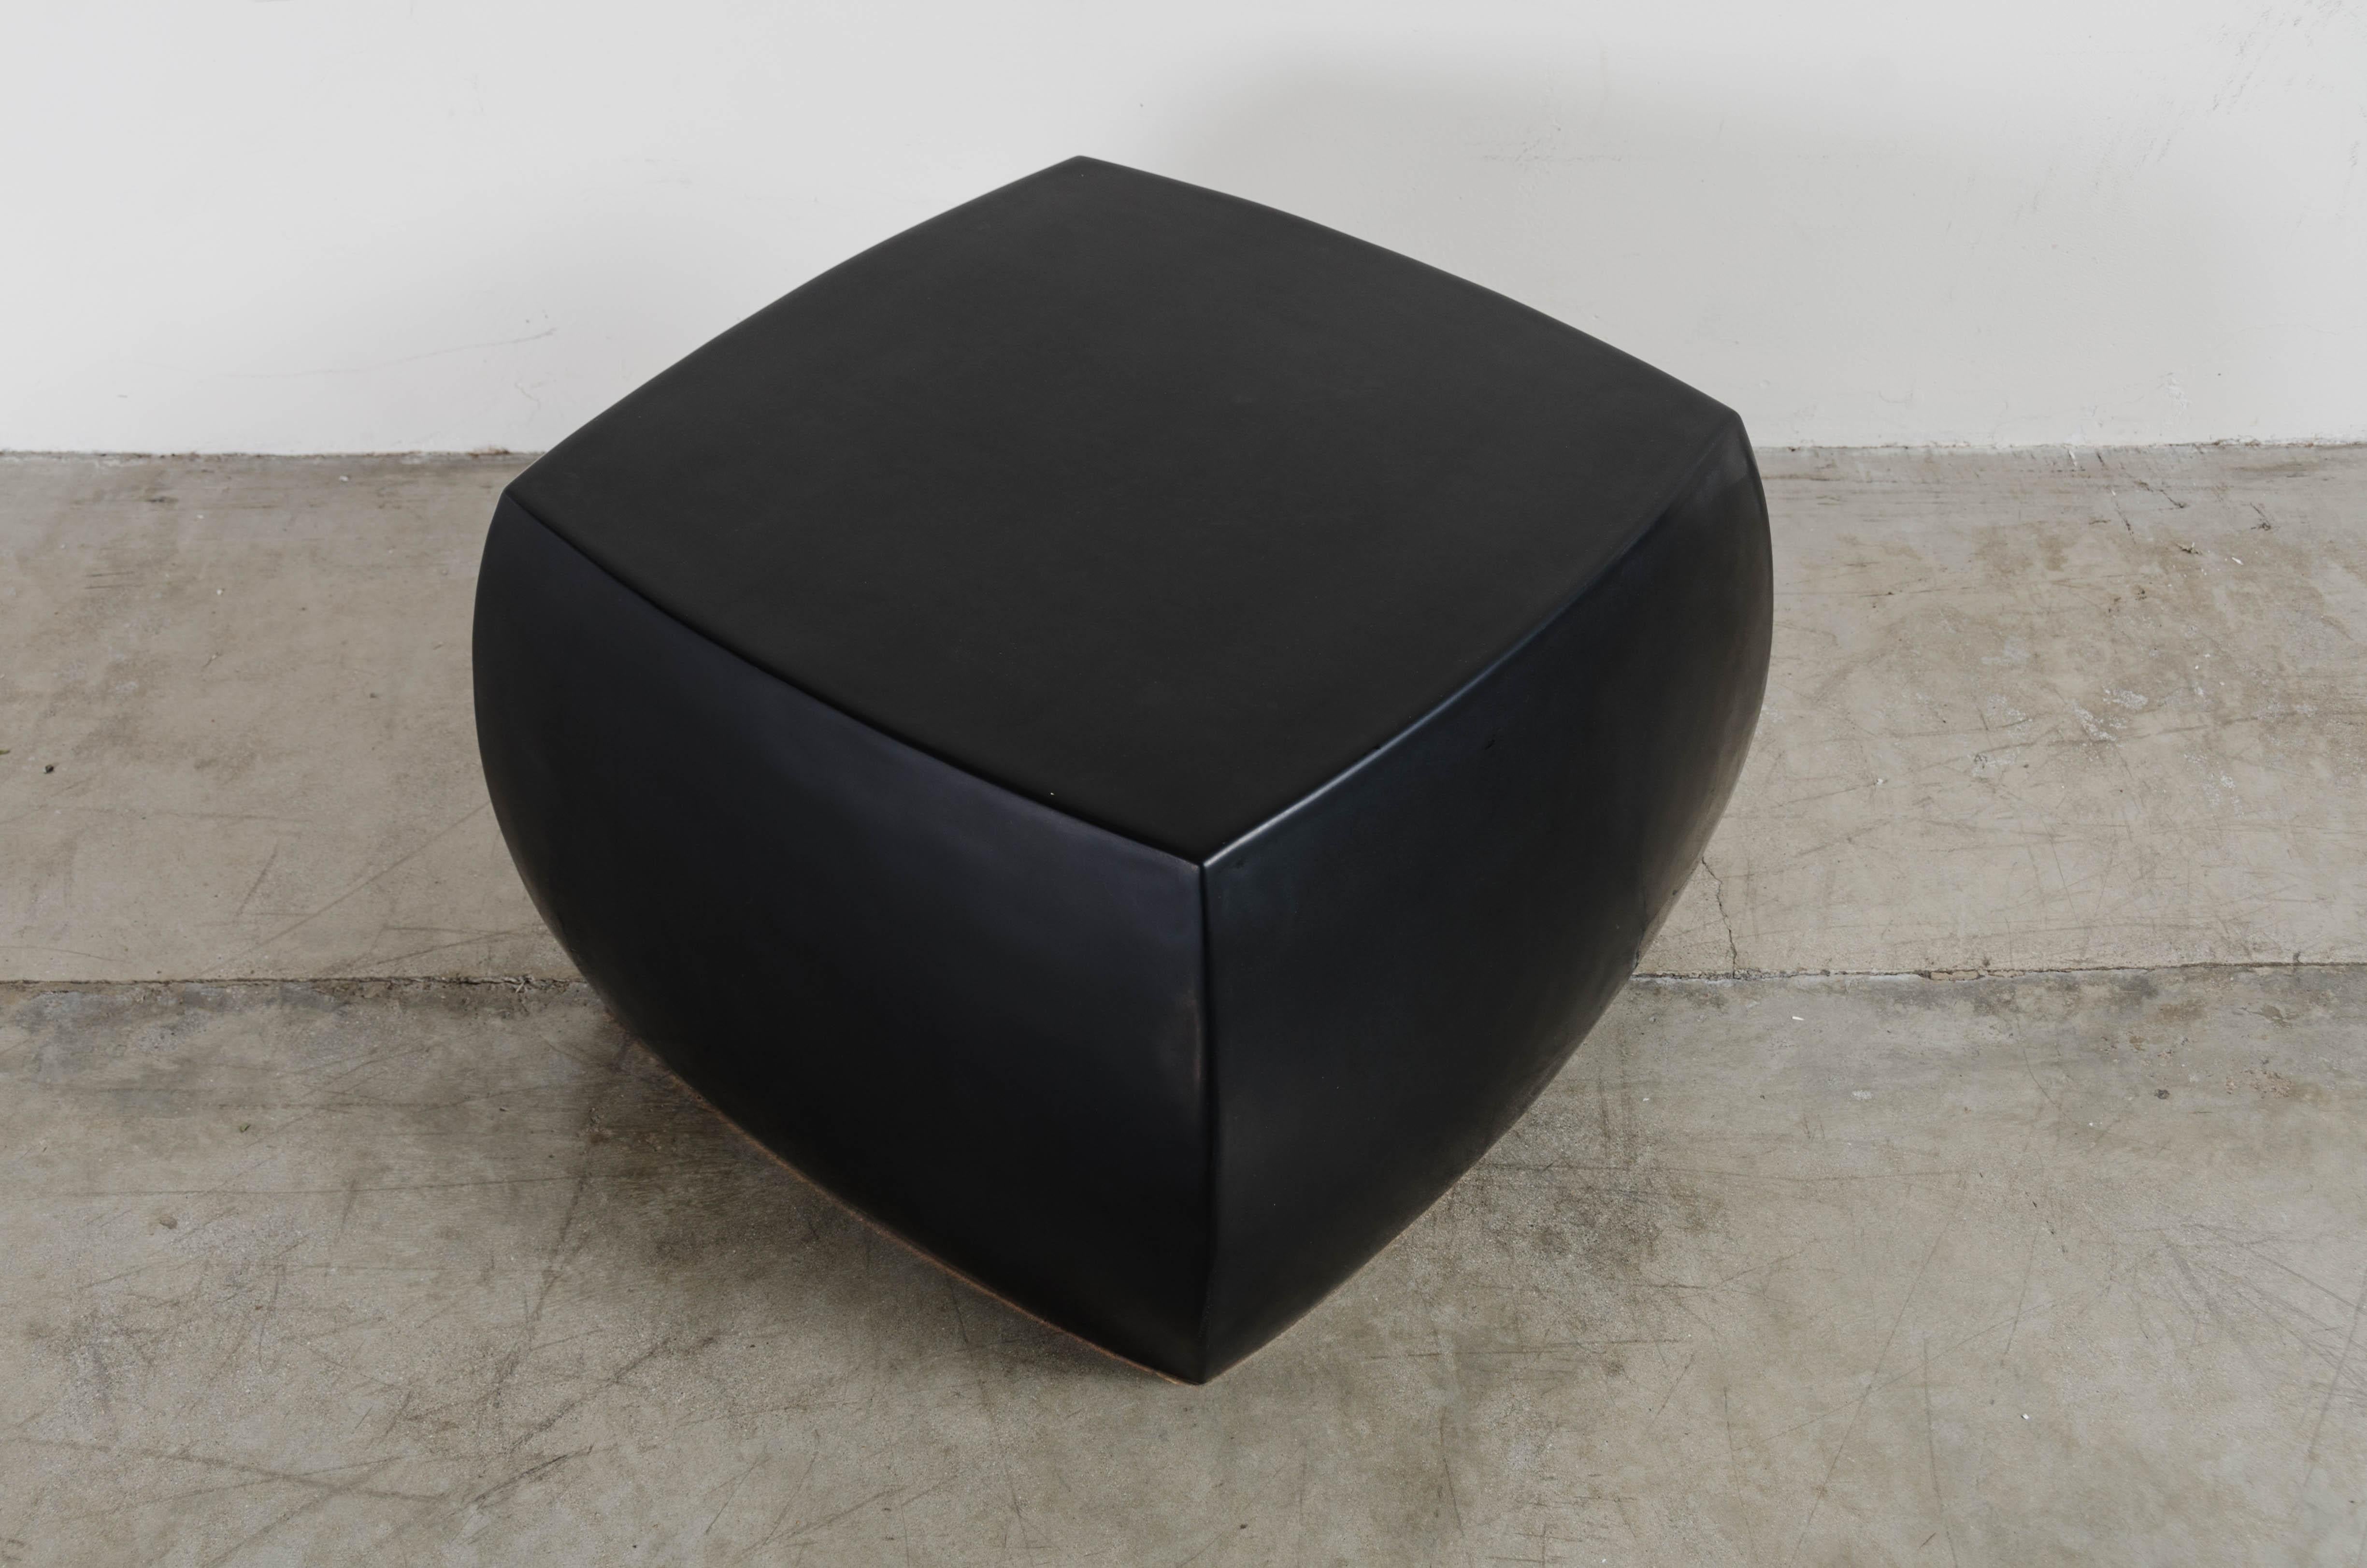 Rounded square stool
Black lacquer
Hand repousse
Limited edition
Each piece is handcrafted individually and is unique.

Lacquer is a technique that dates back to the Shang dynasty, circa 1600-1100 B.C. The pieces are made with at least 60